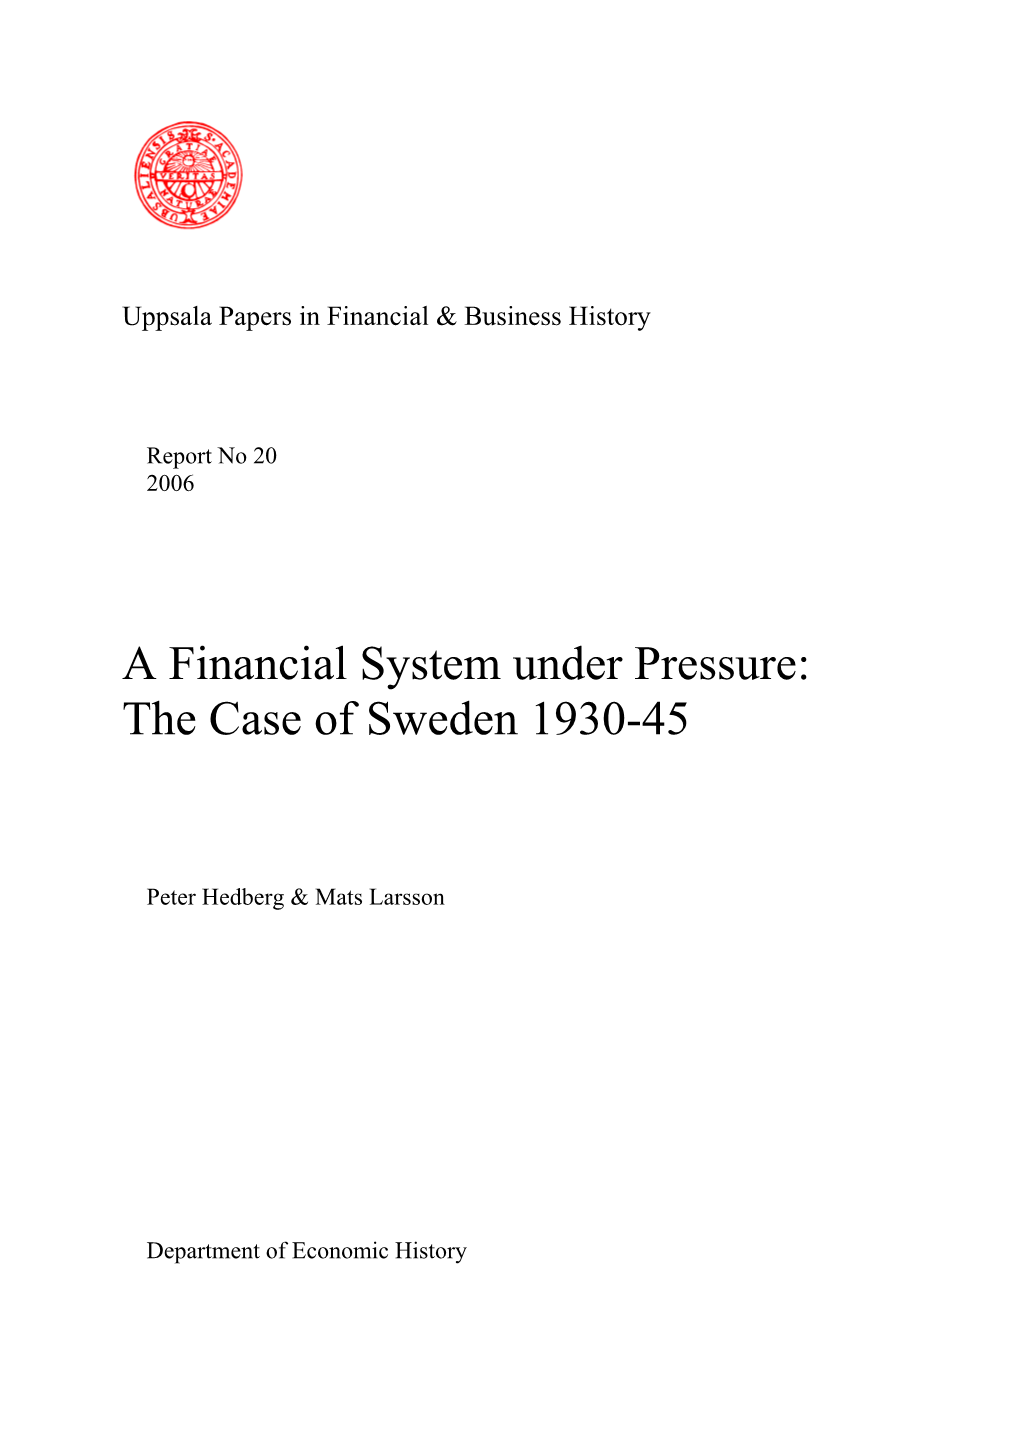 A Financial System Under Pressure: the Case of Sweden 1930-45